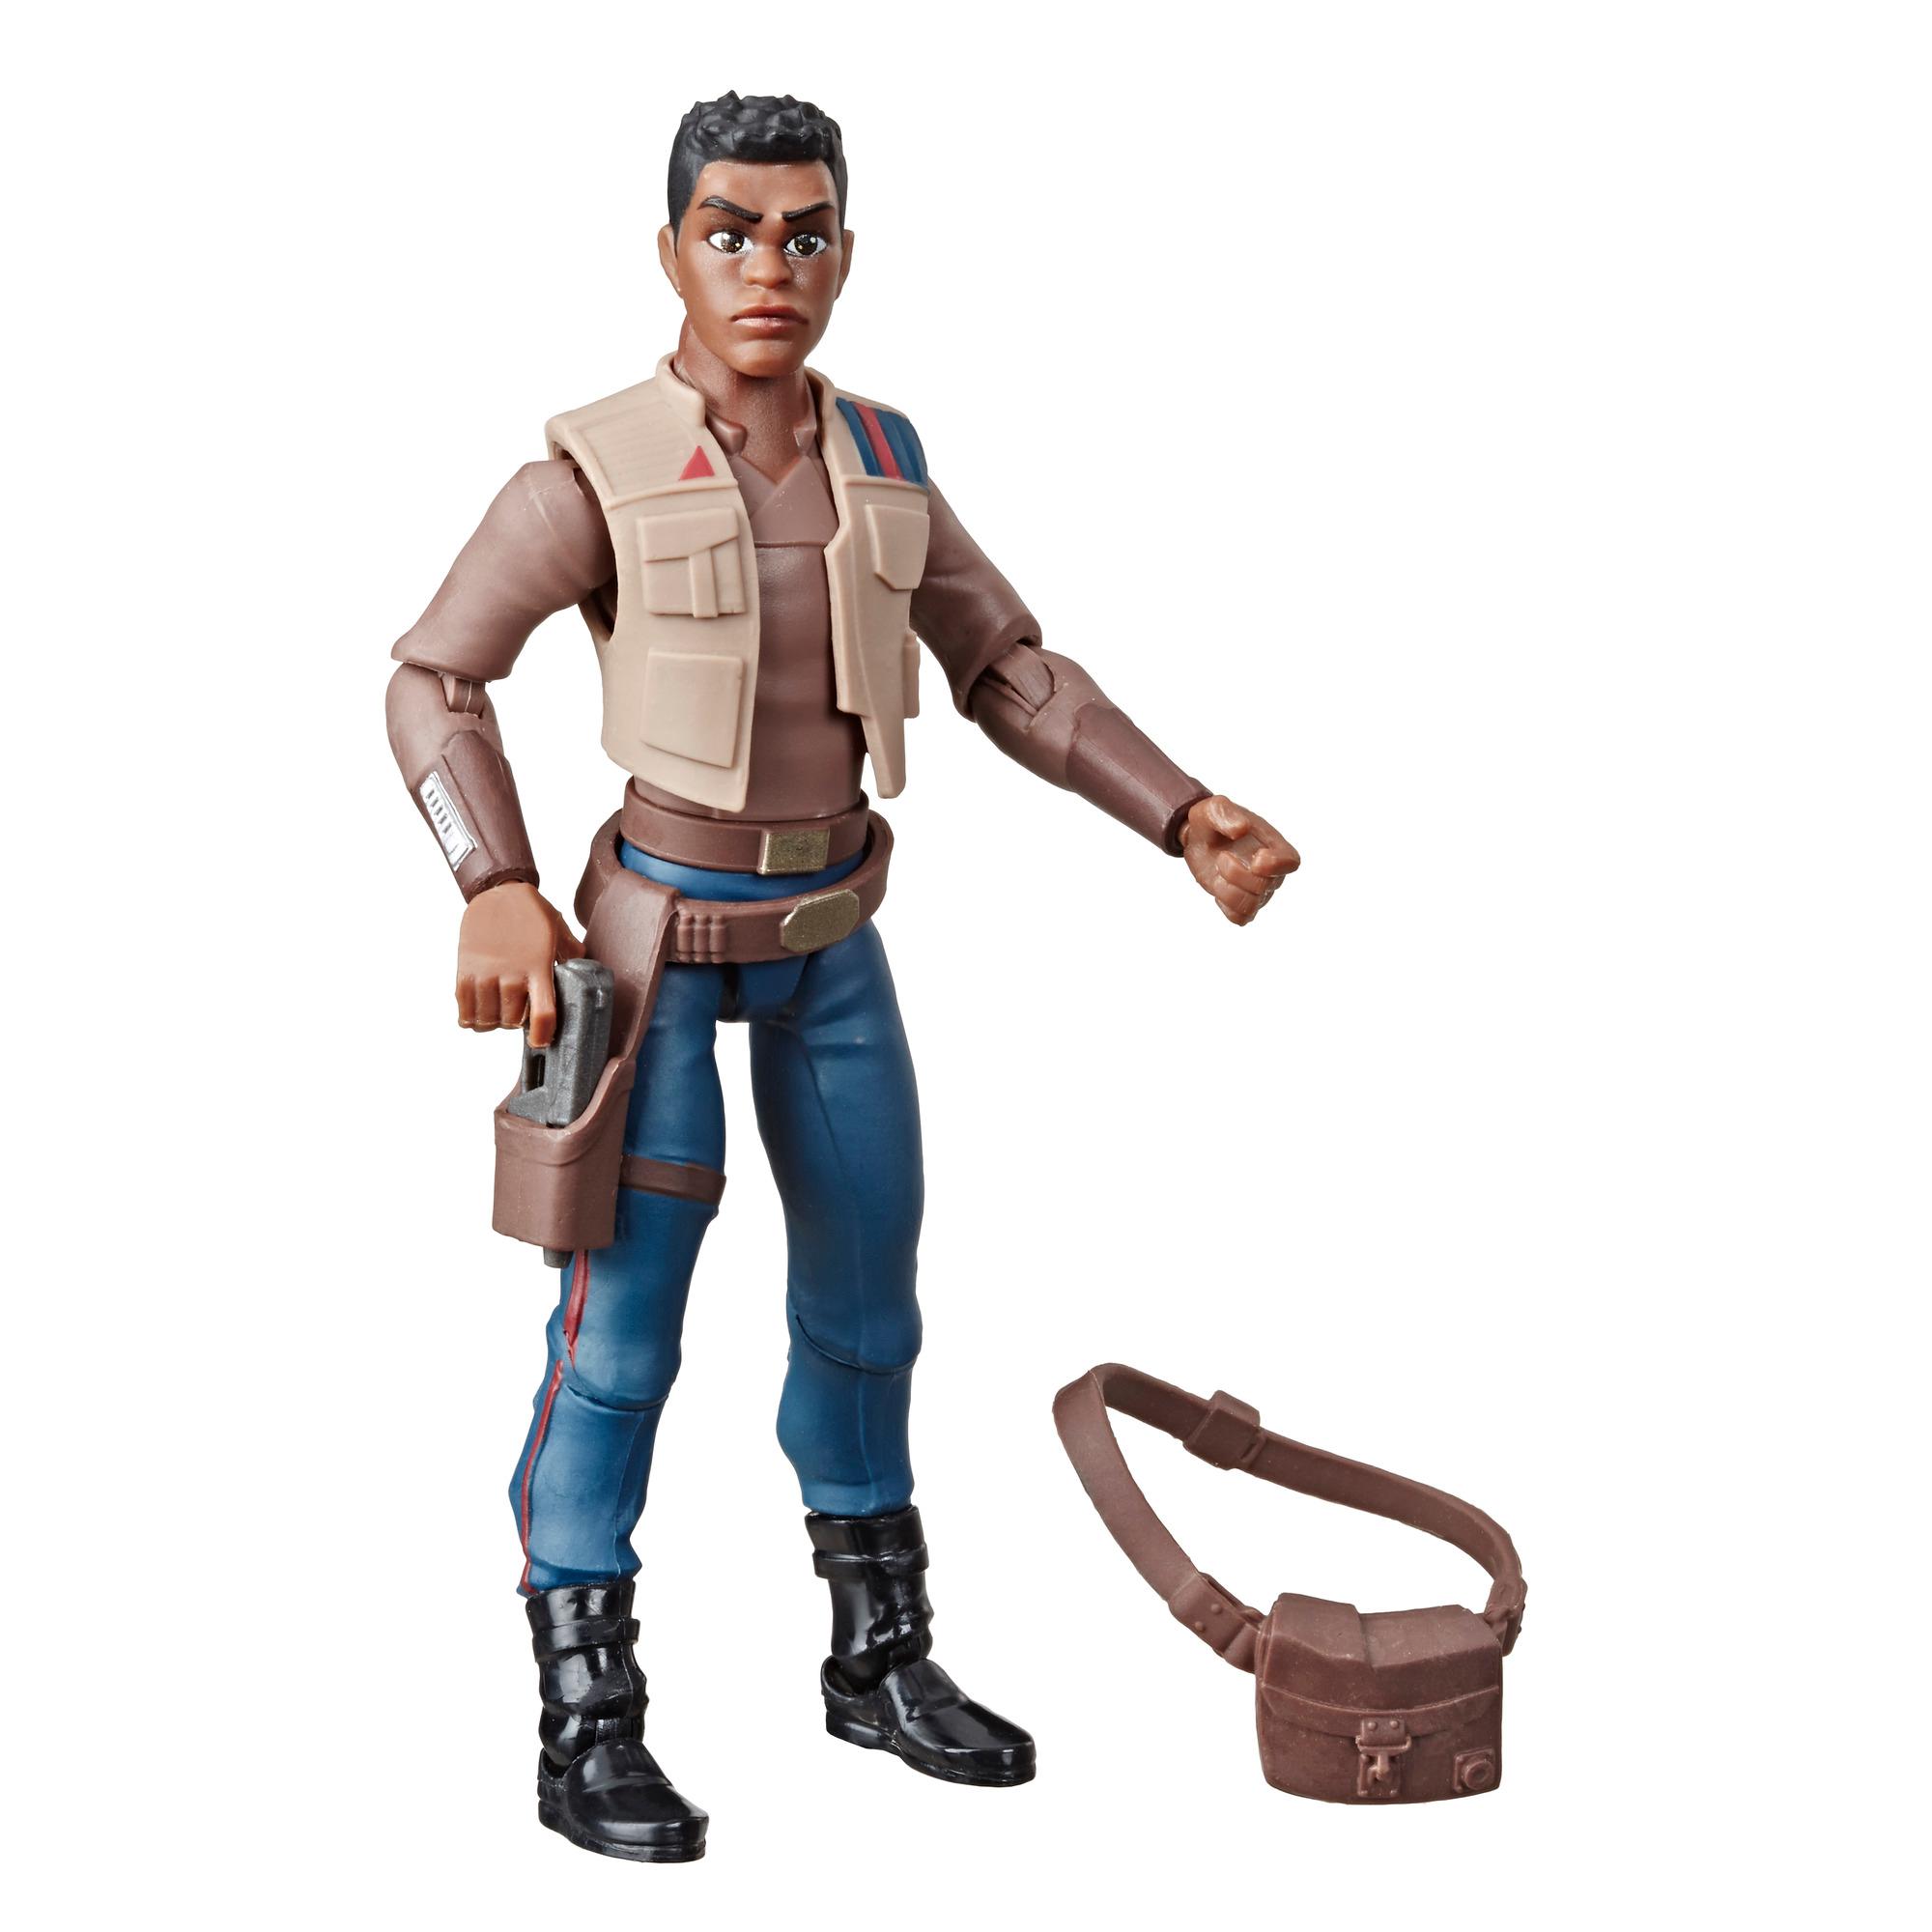 Star Wars Galaxy of Adventures Finn 5-Inch-Scale Action Figure Toy